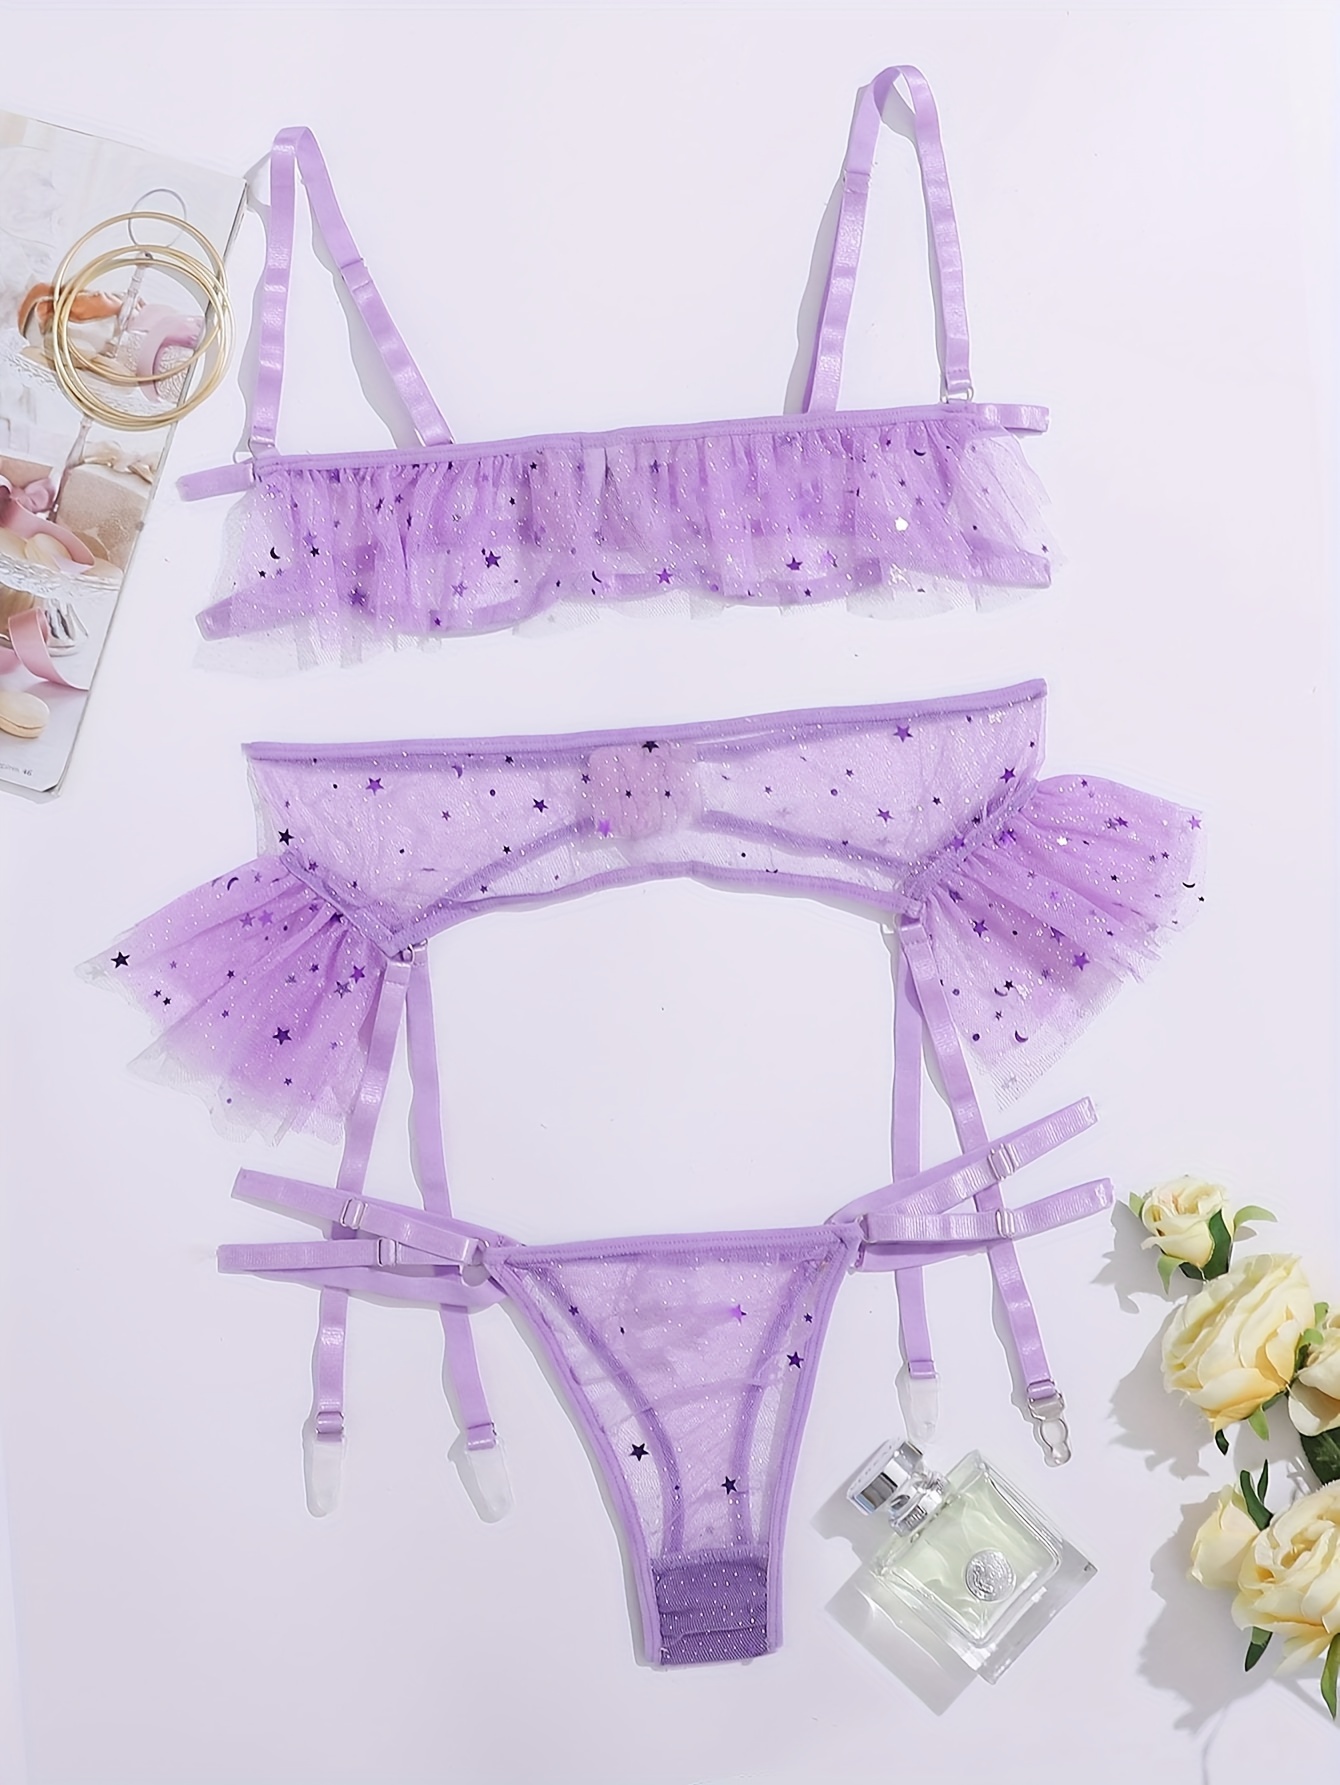 Floral Embroidery Lingerie Set, Open Cup Bra & Thongs, Women's Sexy  Lingerie & Underwear